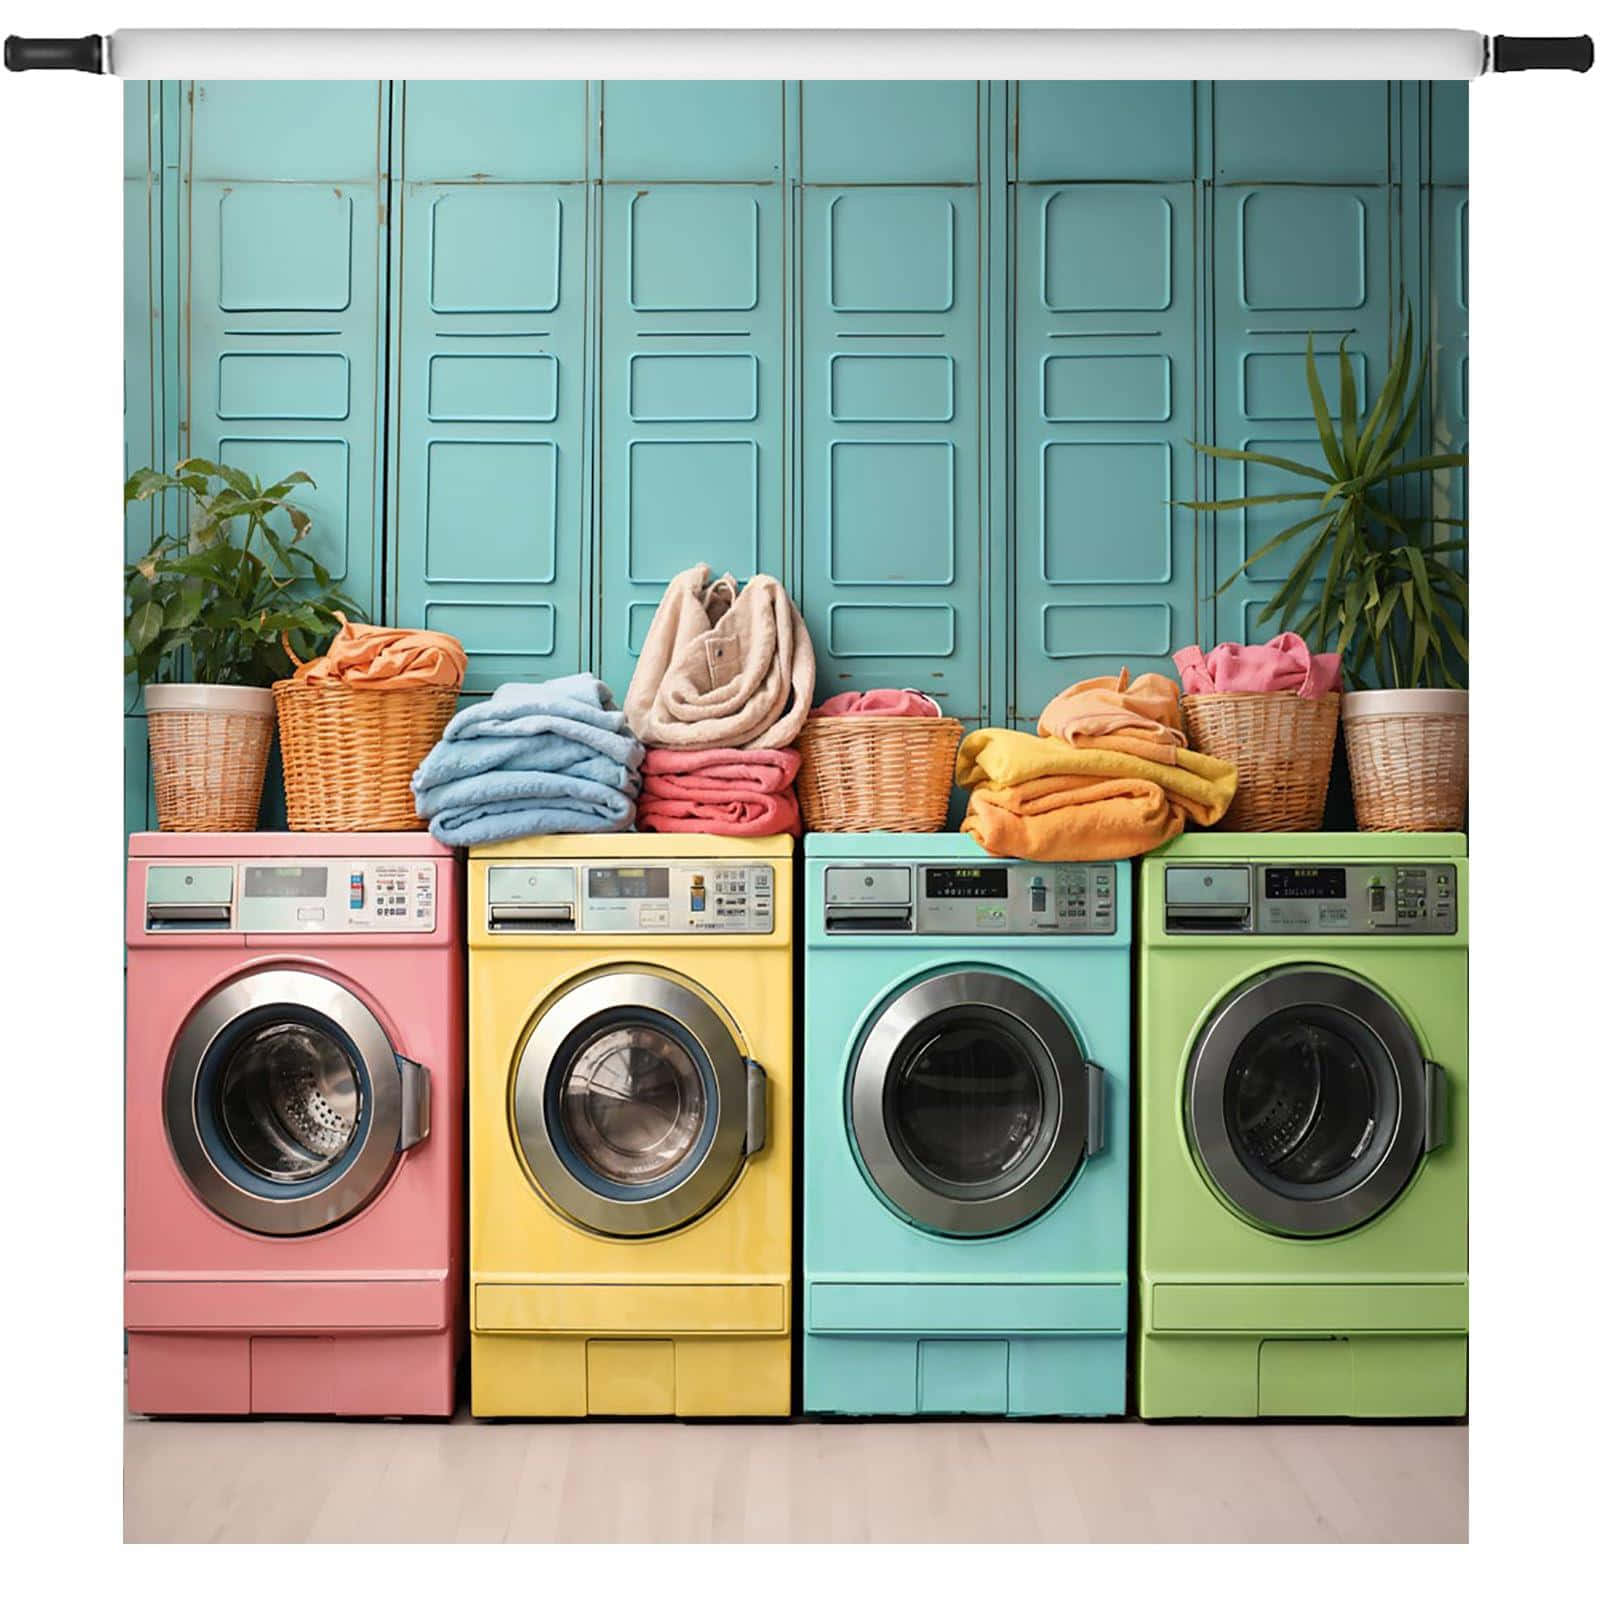 Colorful Laundry Room Washing Machines Wallpaper